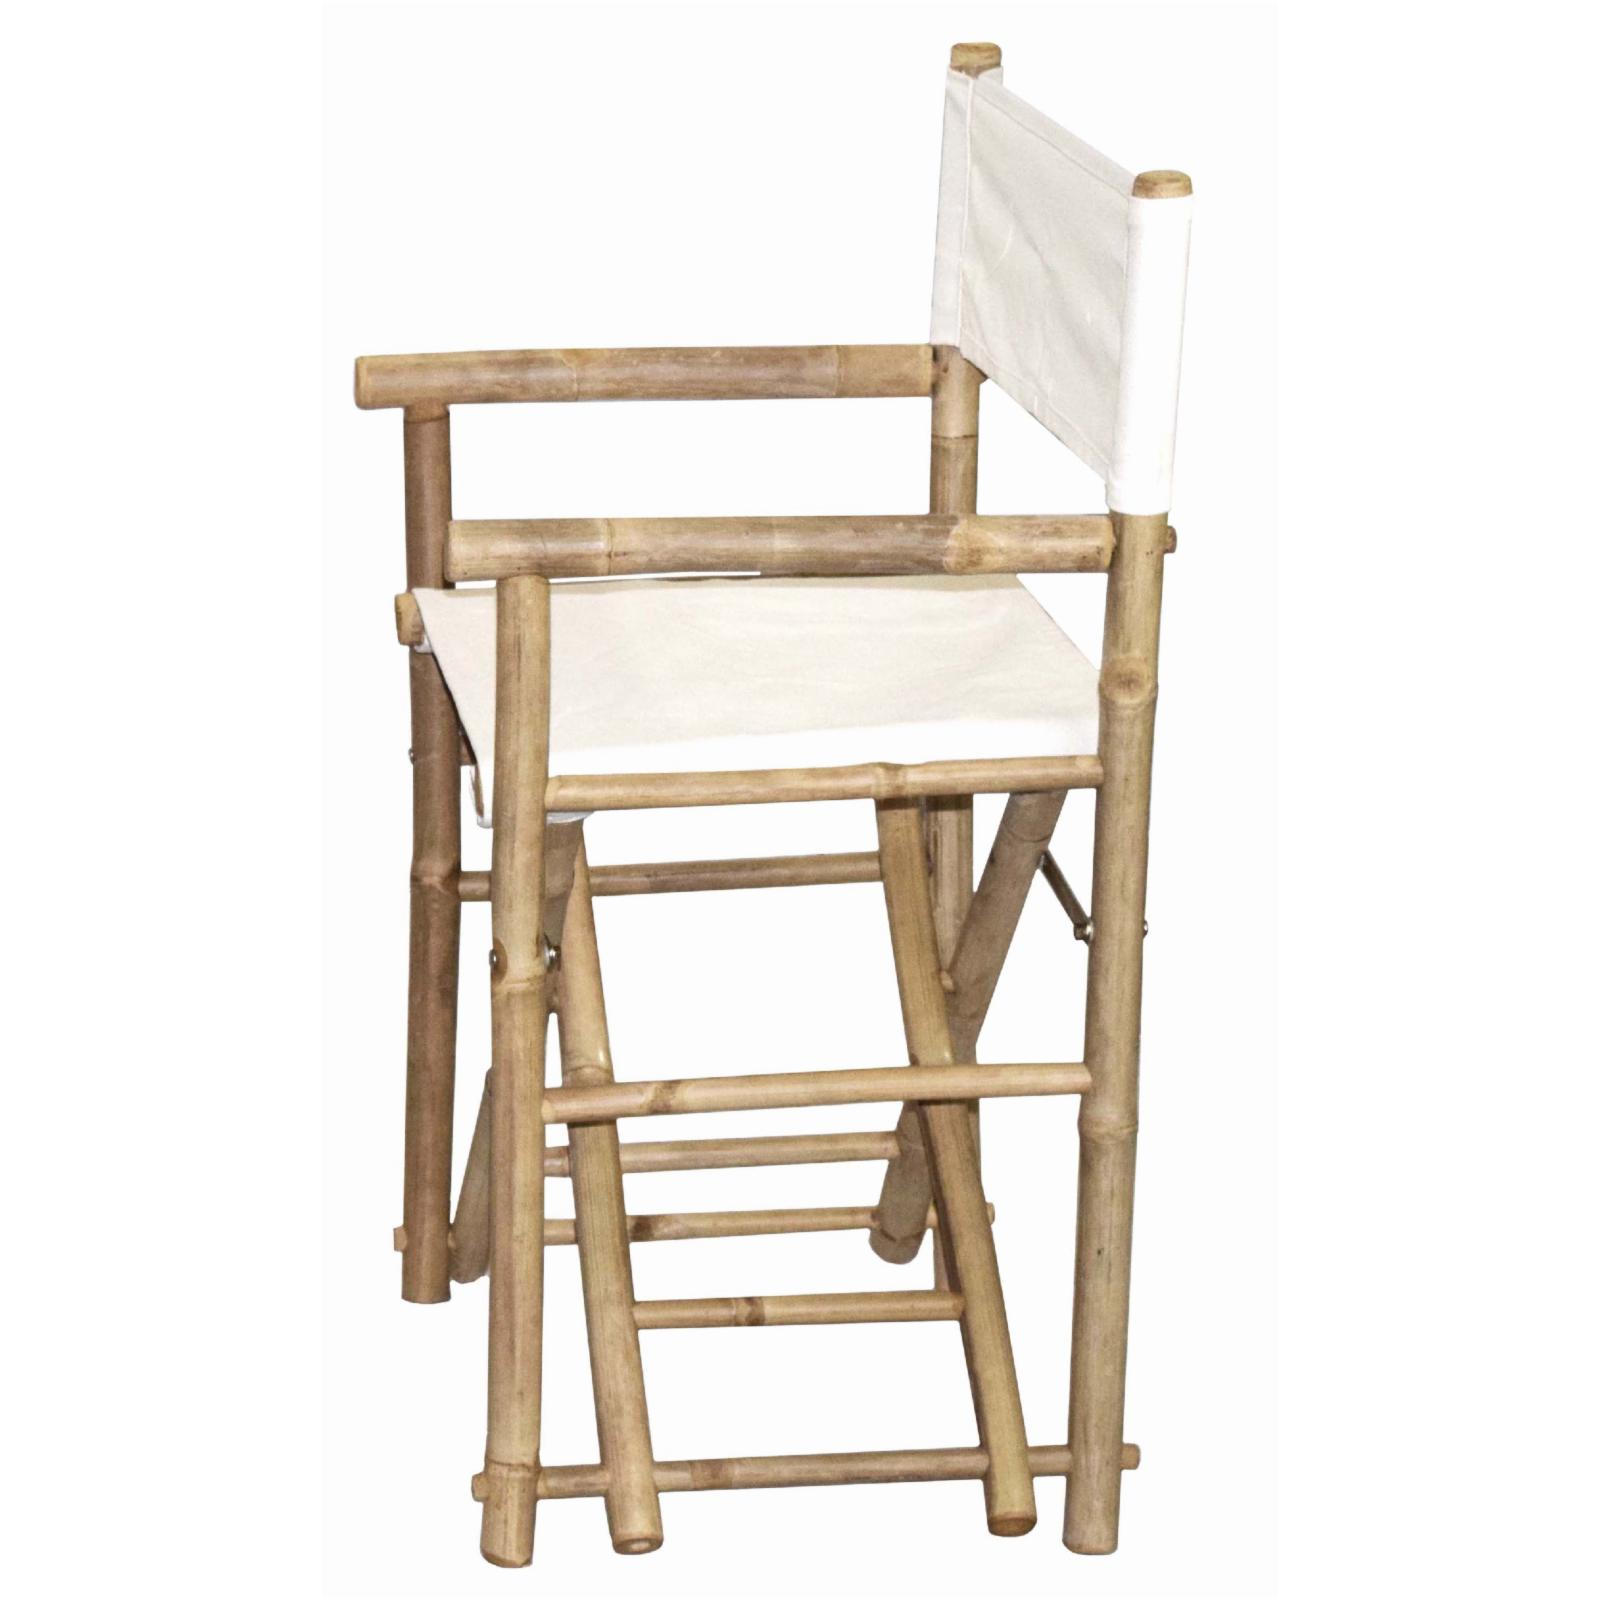 Bamboo54 Folding Bamboo Low Directors Chair with Canvas Cover - Set of 2 - image 5 of 5